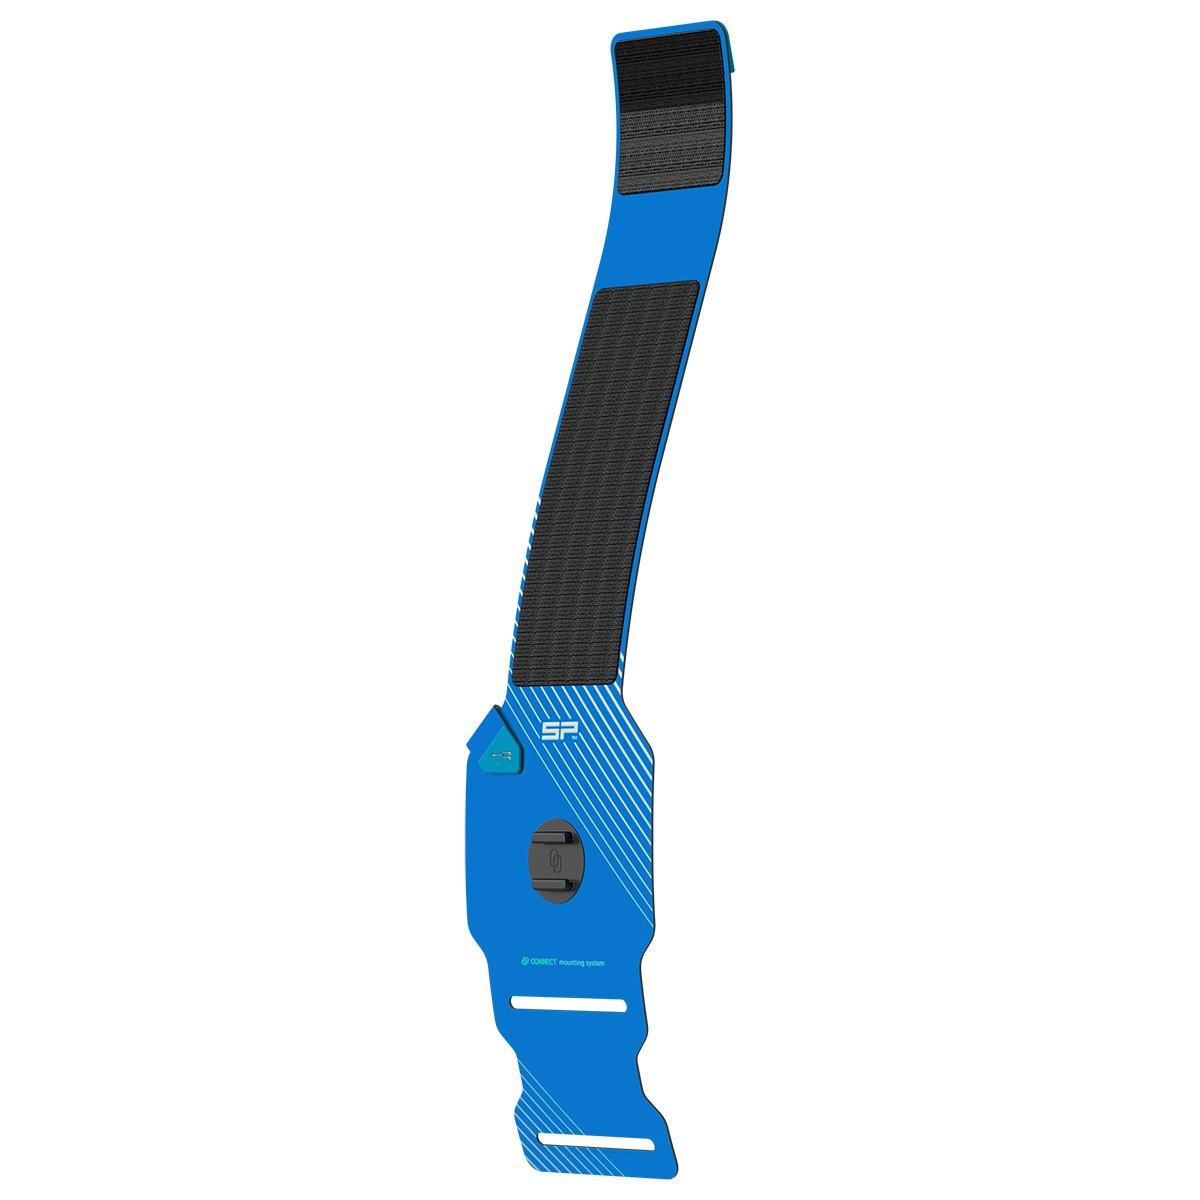 SP CONNECT SP Connect Running Blau Smartphone Band, Running